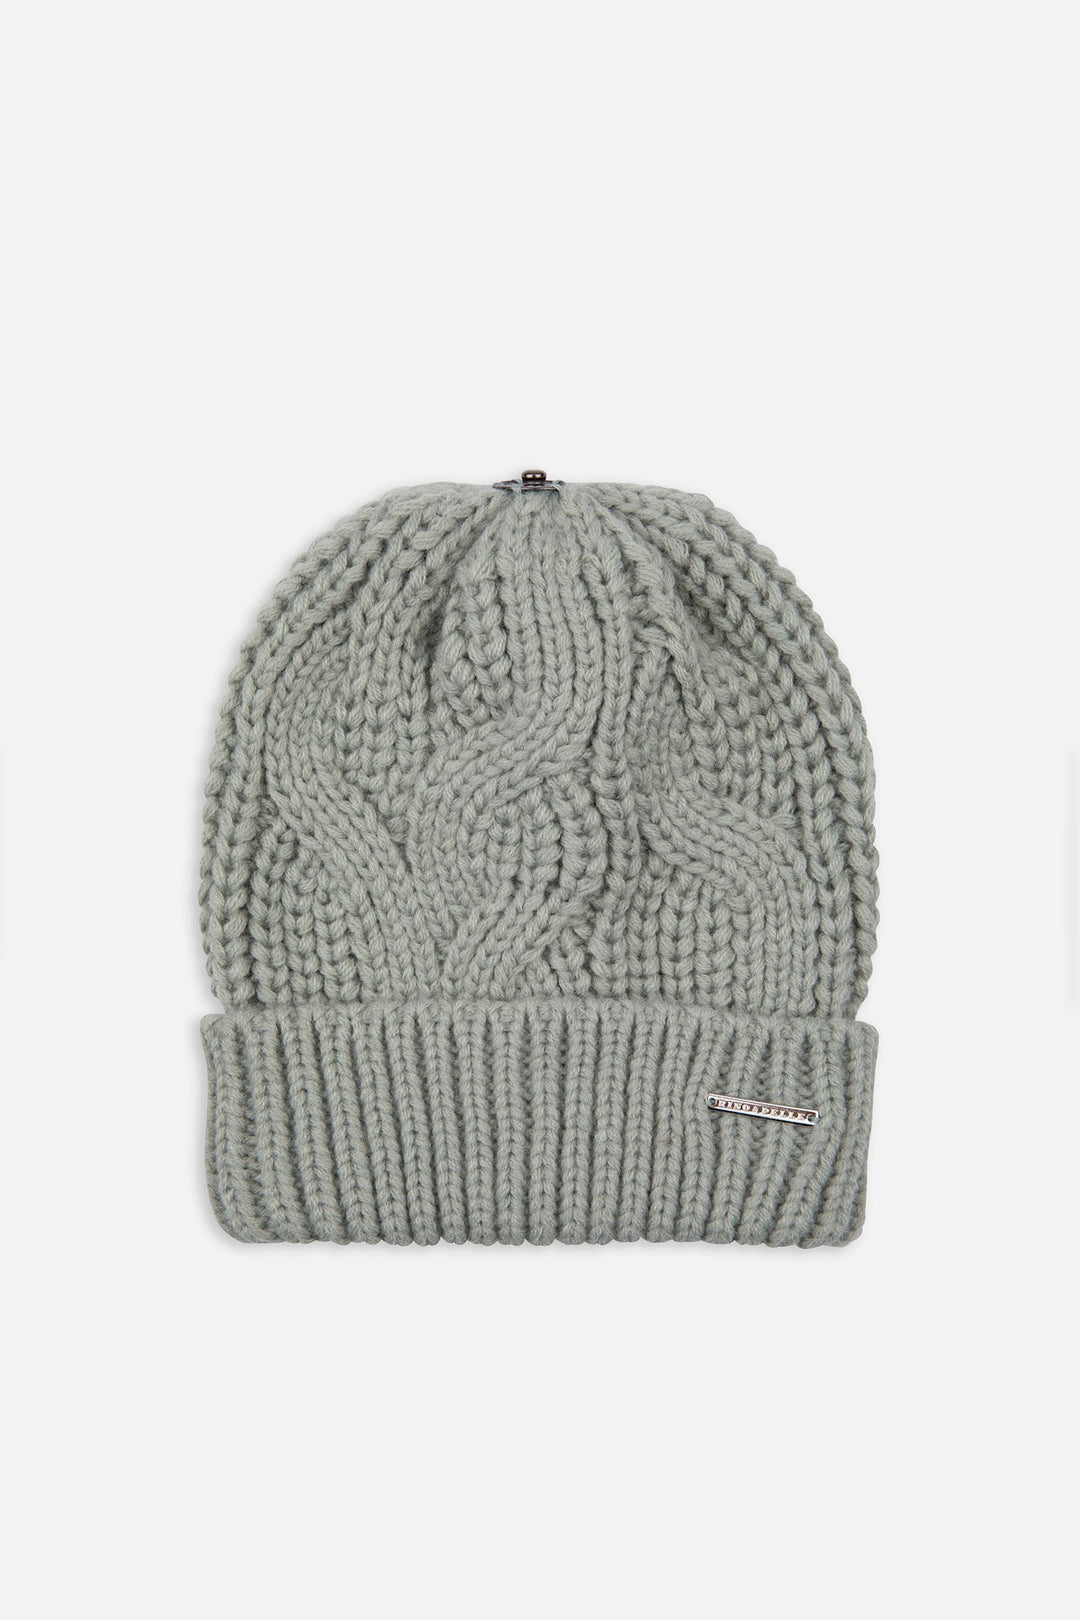 Rino & Pelle Aaf Knitted Beanie with Pom Pom